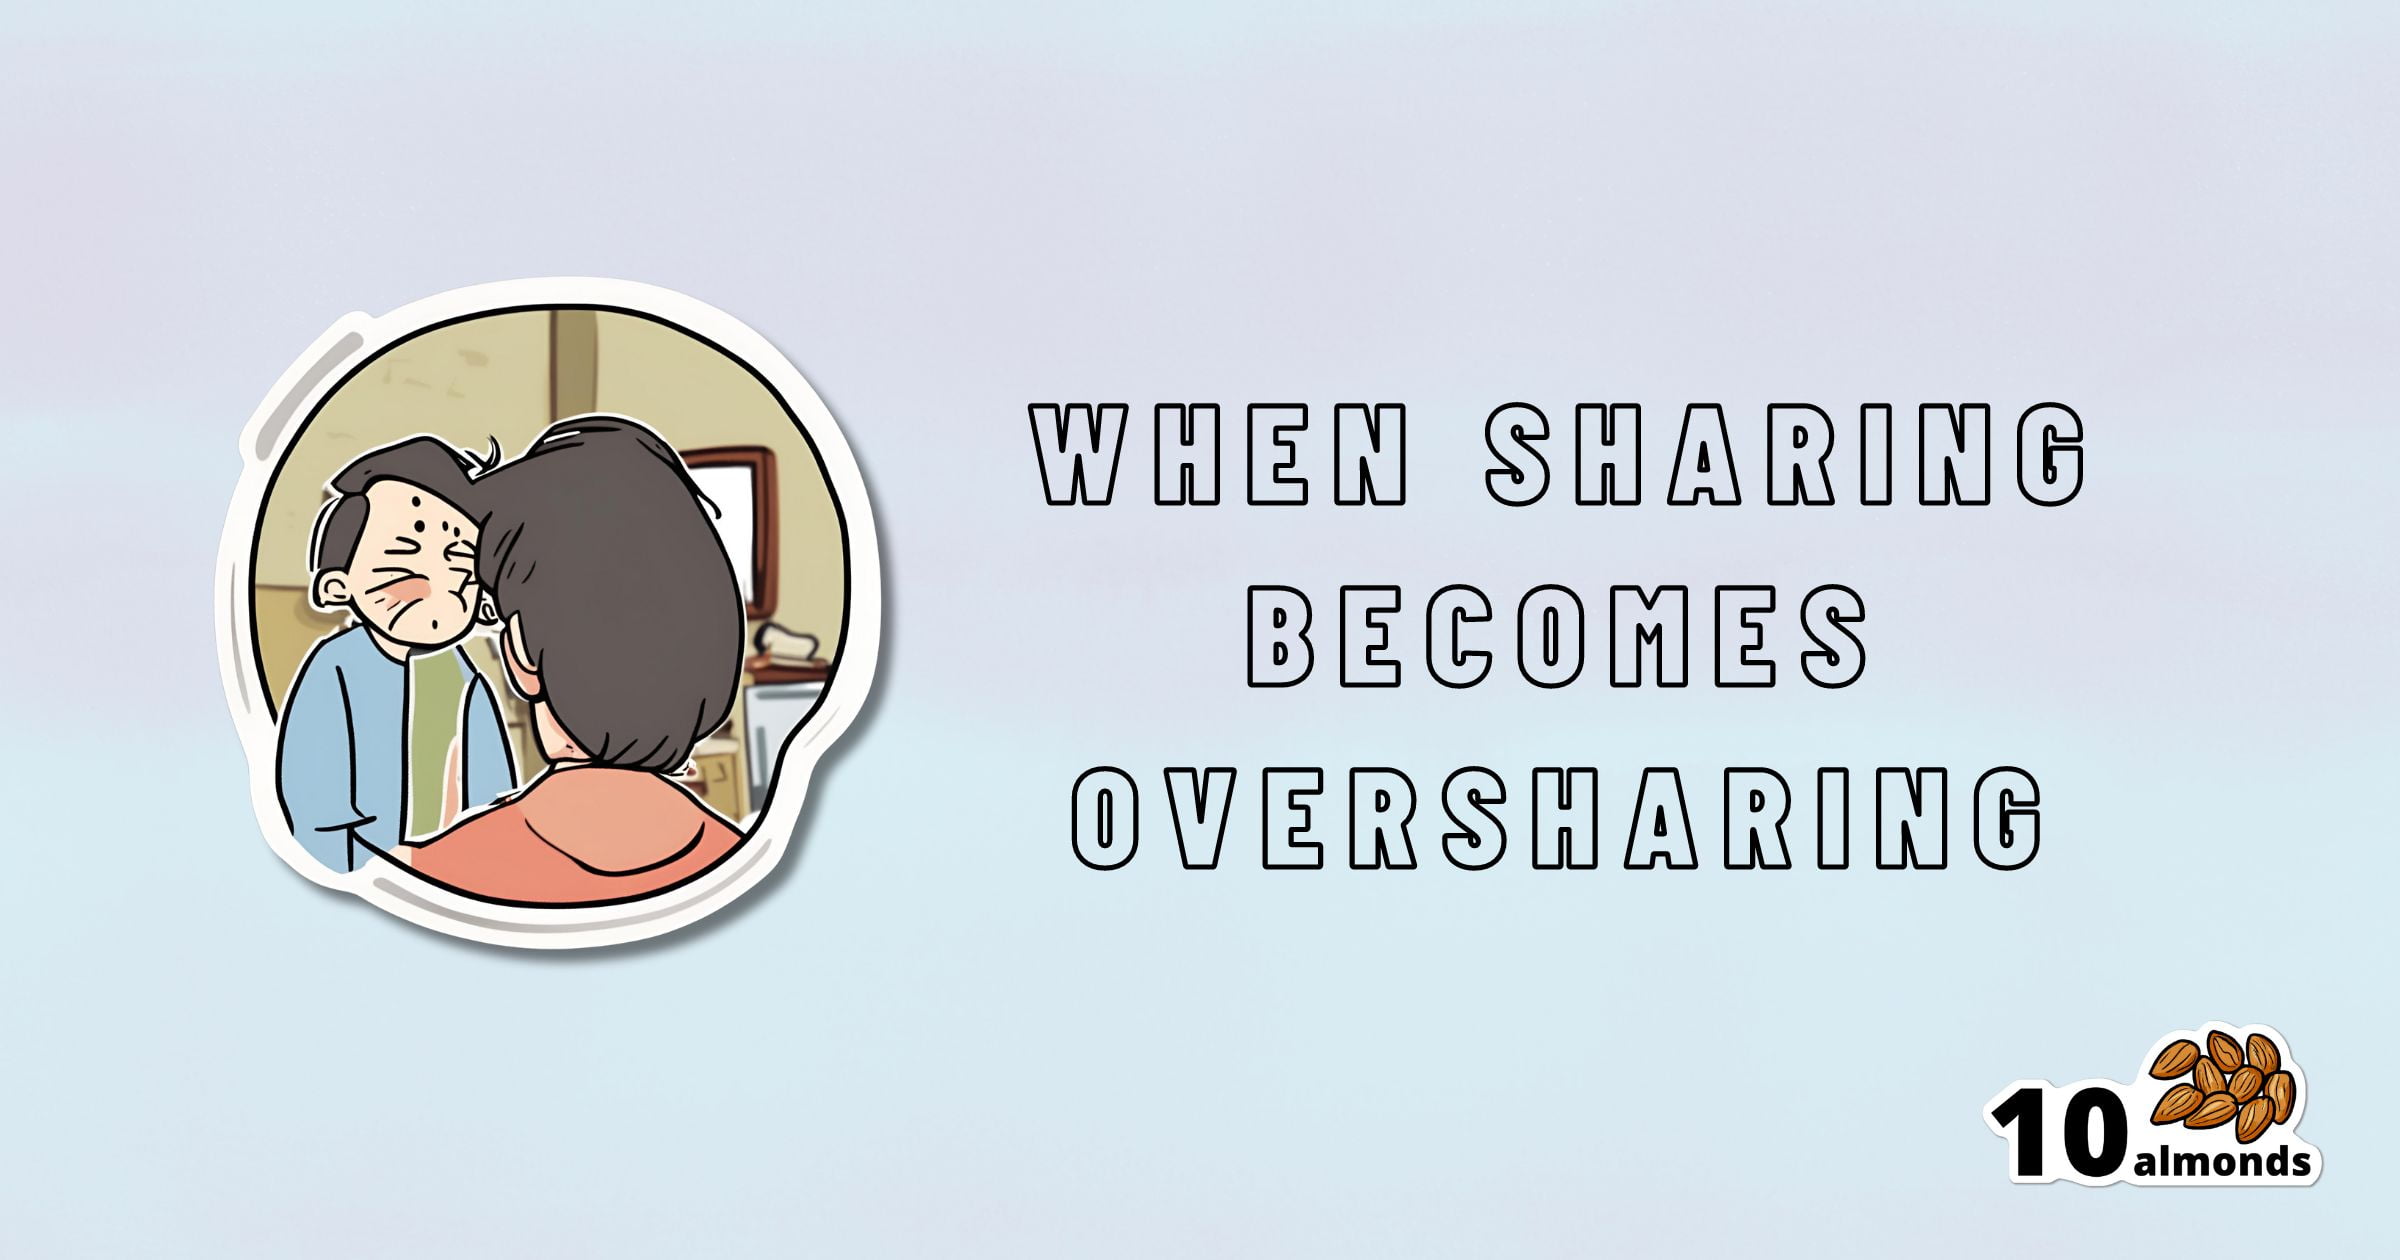 A cartoon illustration shows two people in conversation, one looking visibly uncomfortable. The text on the right side reads "When Sharing Becomes Oversharing." Highlighting the dangers to mental health, the image also features a logo with "10 almonds" and an illustration of almonds in the bottom right corner.